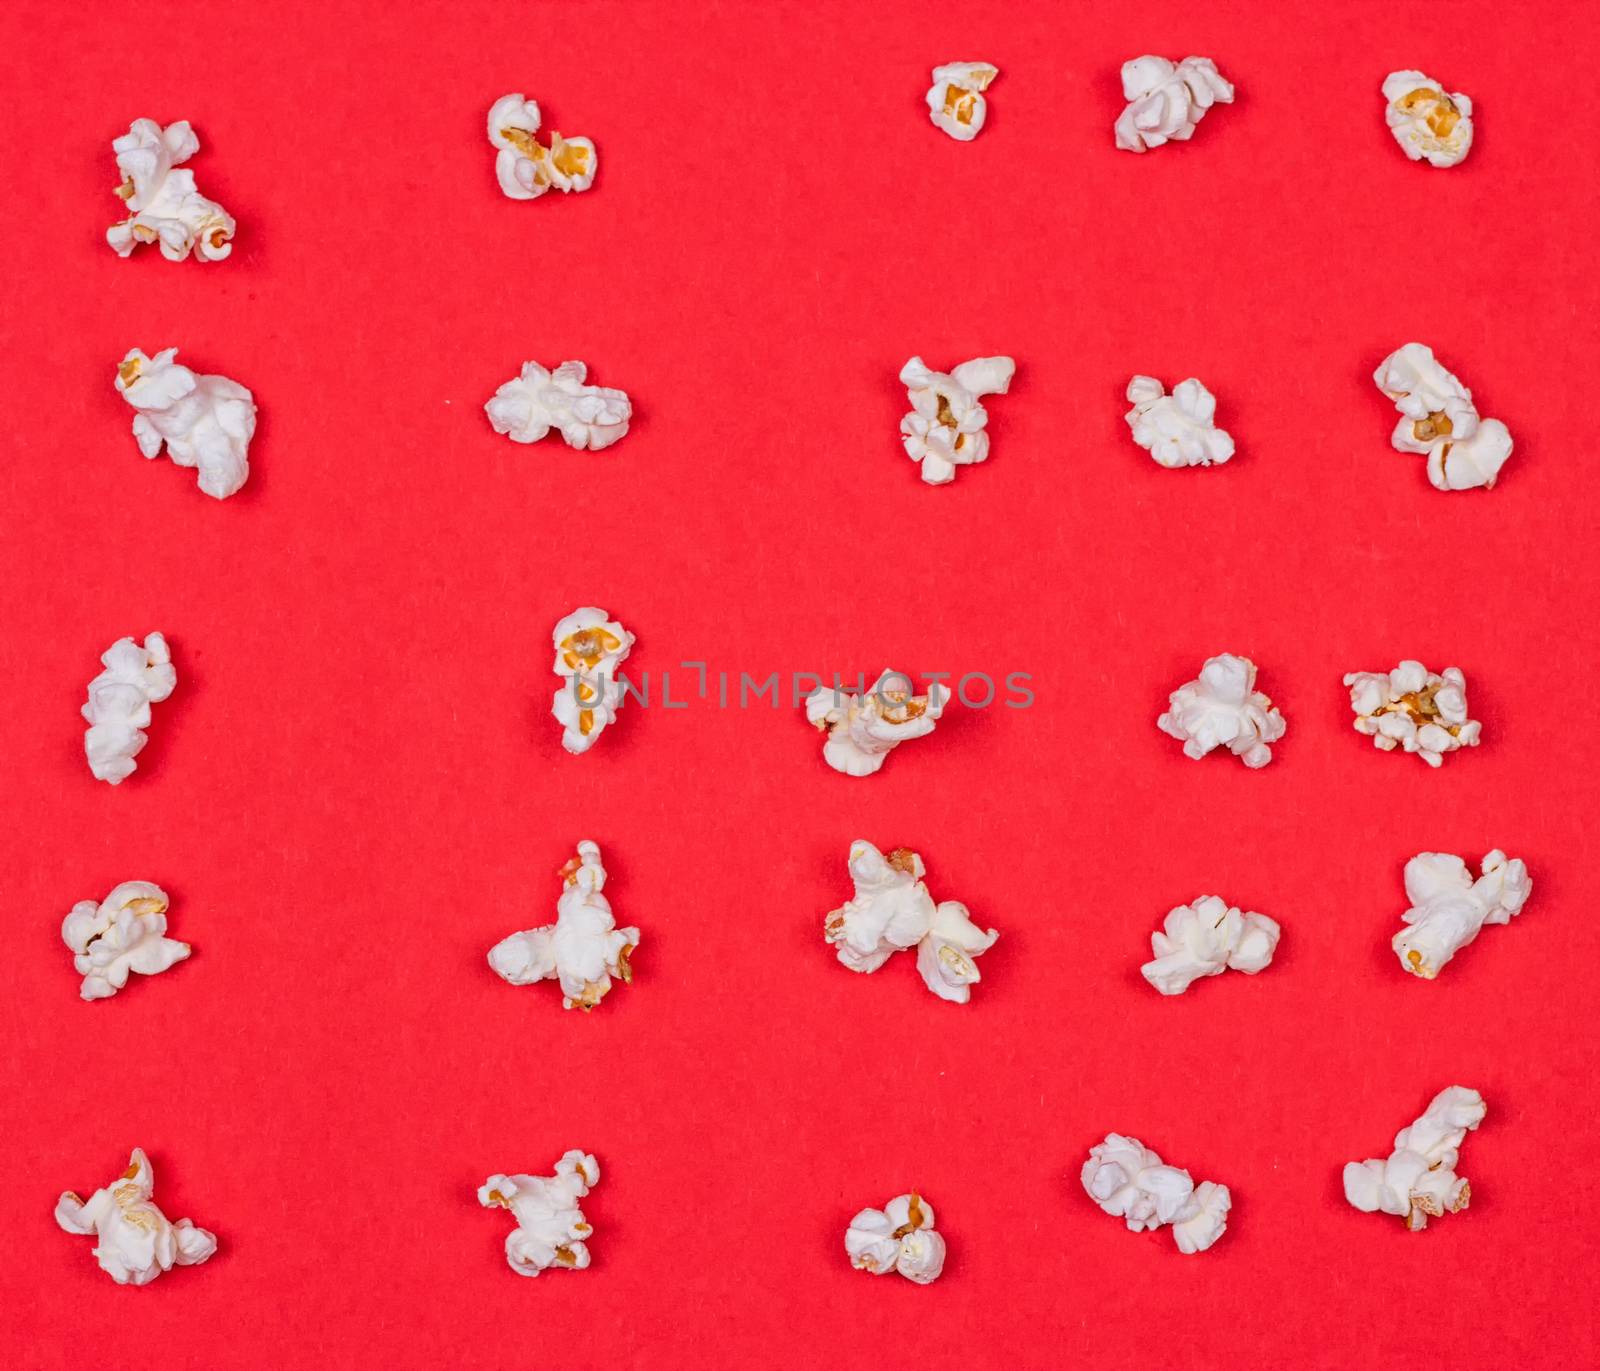 popcorn neatly laid out on a red background